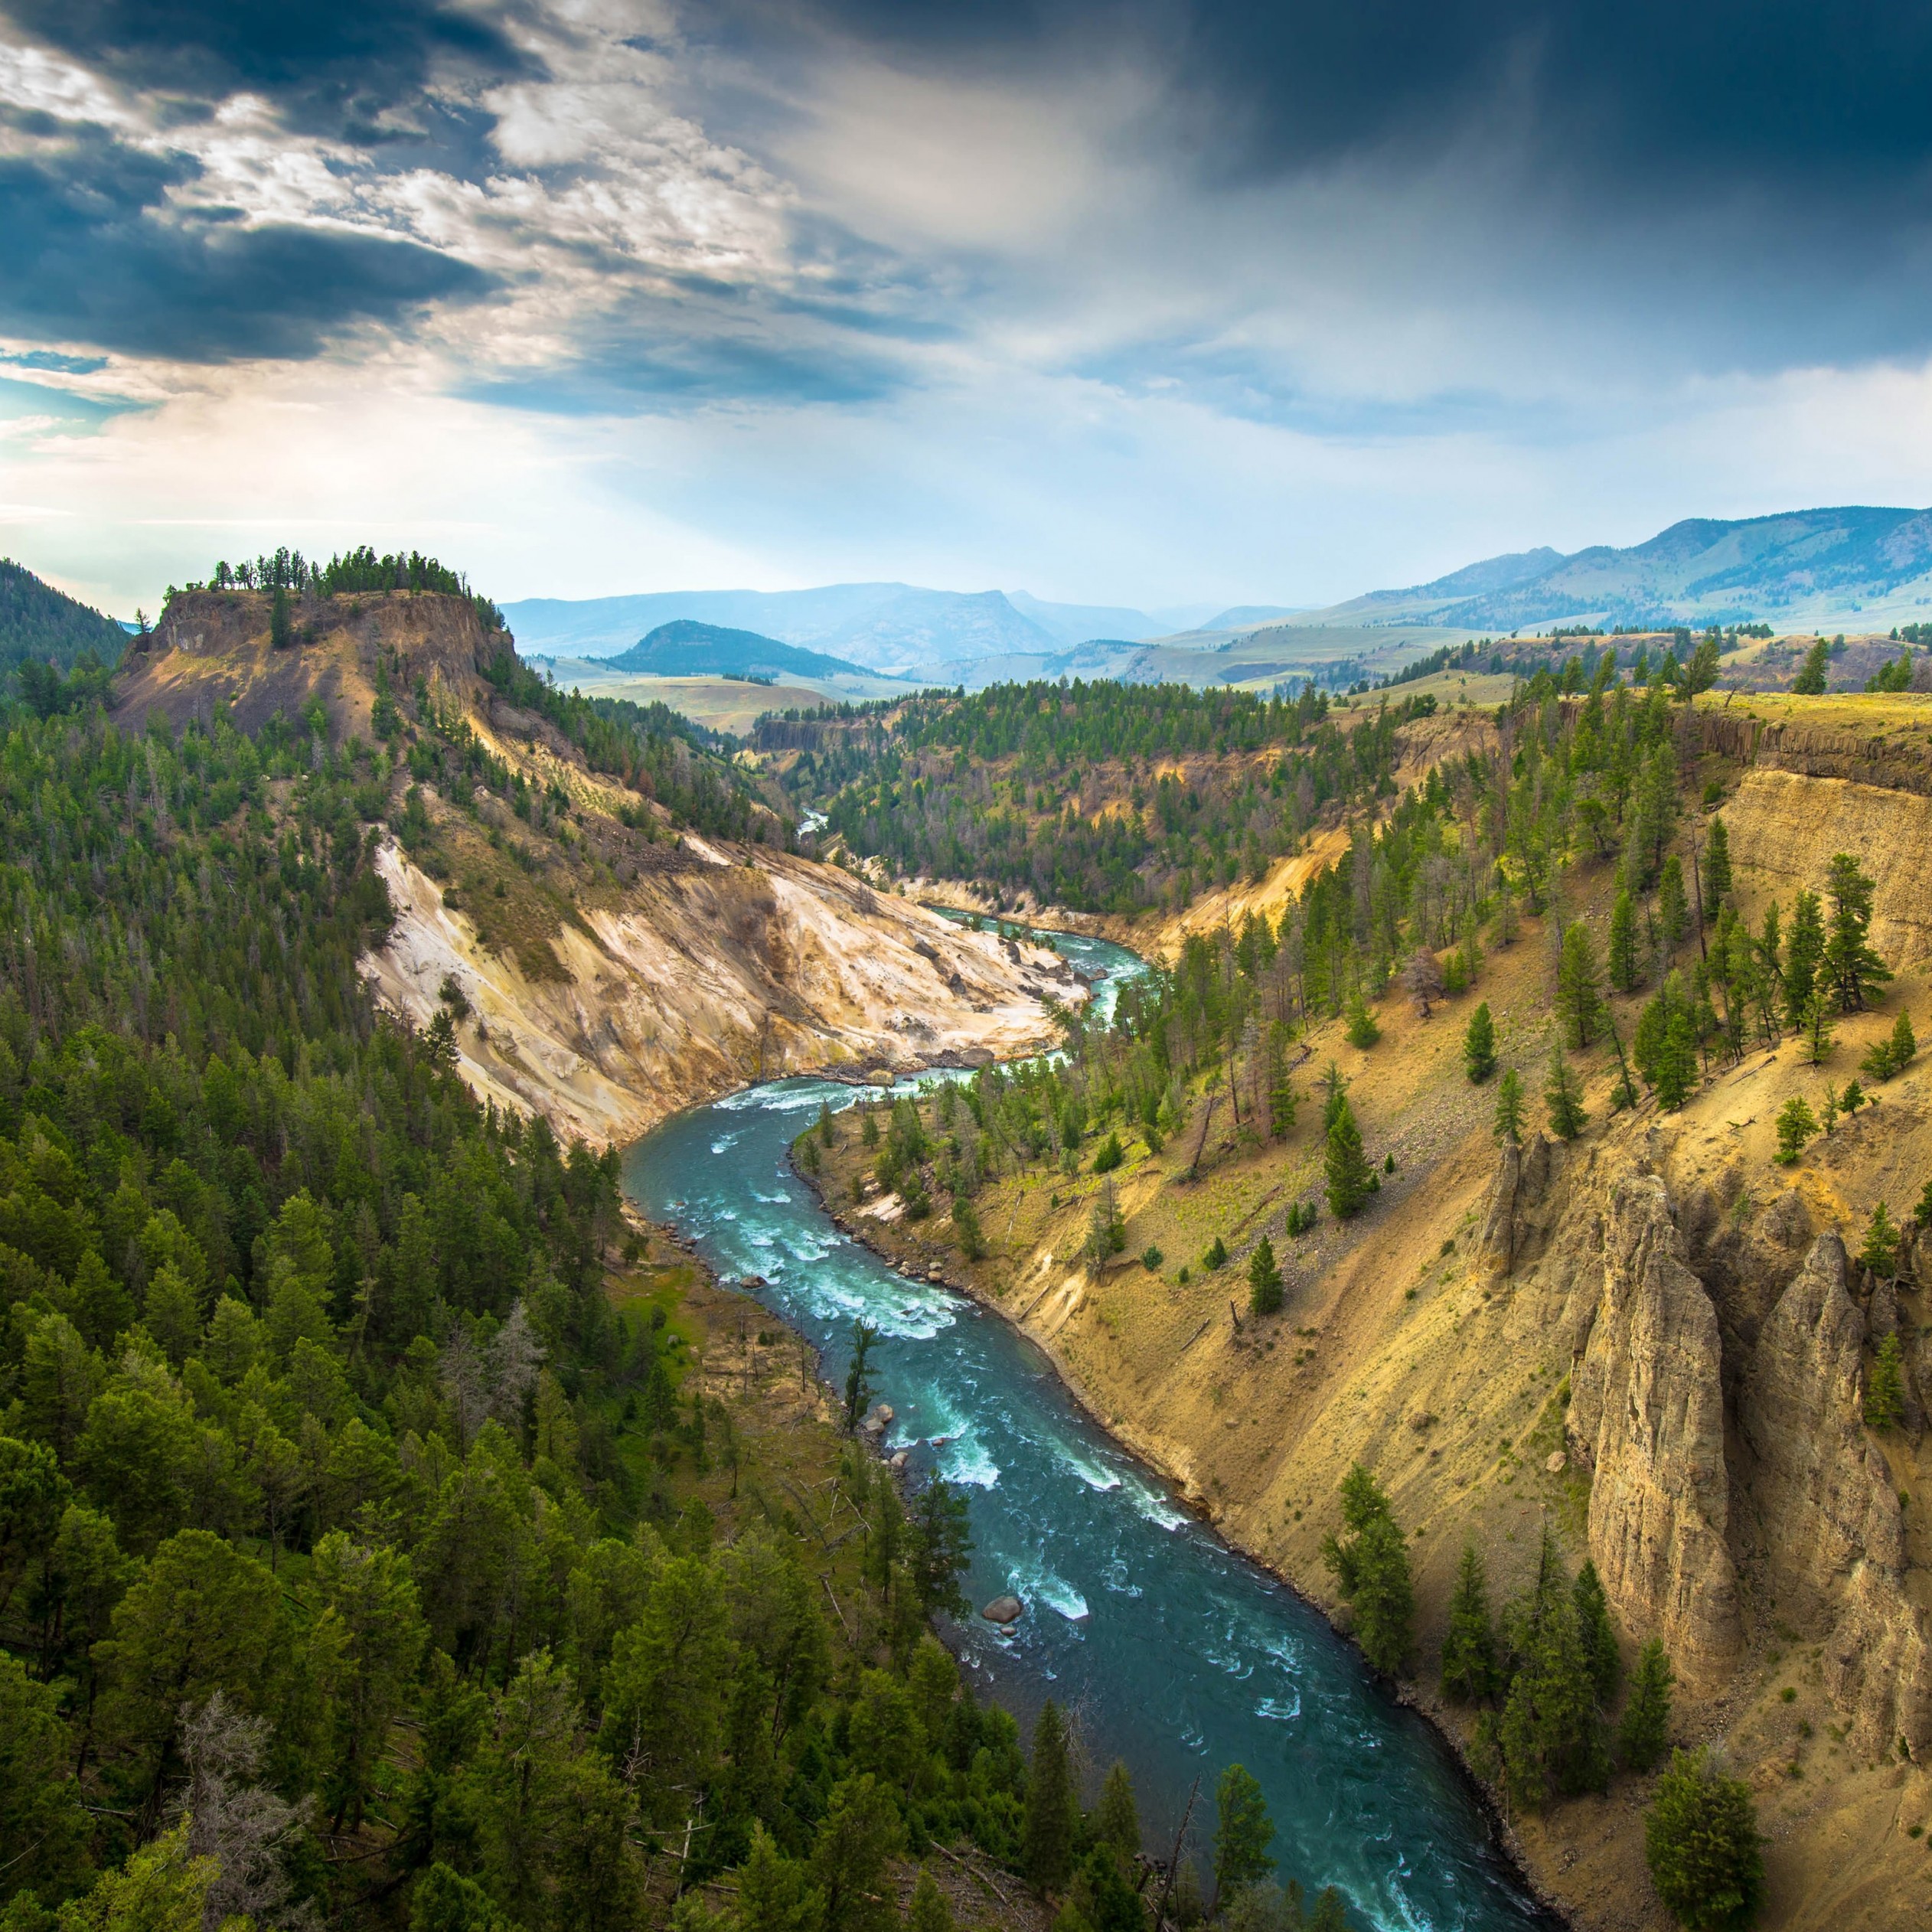 The River, Grand Canyon of Yellowstone National Park, USA Wallpaper for Apple iPad Air